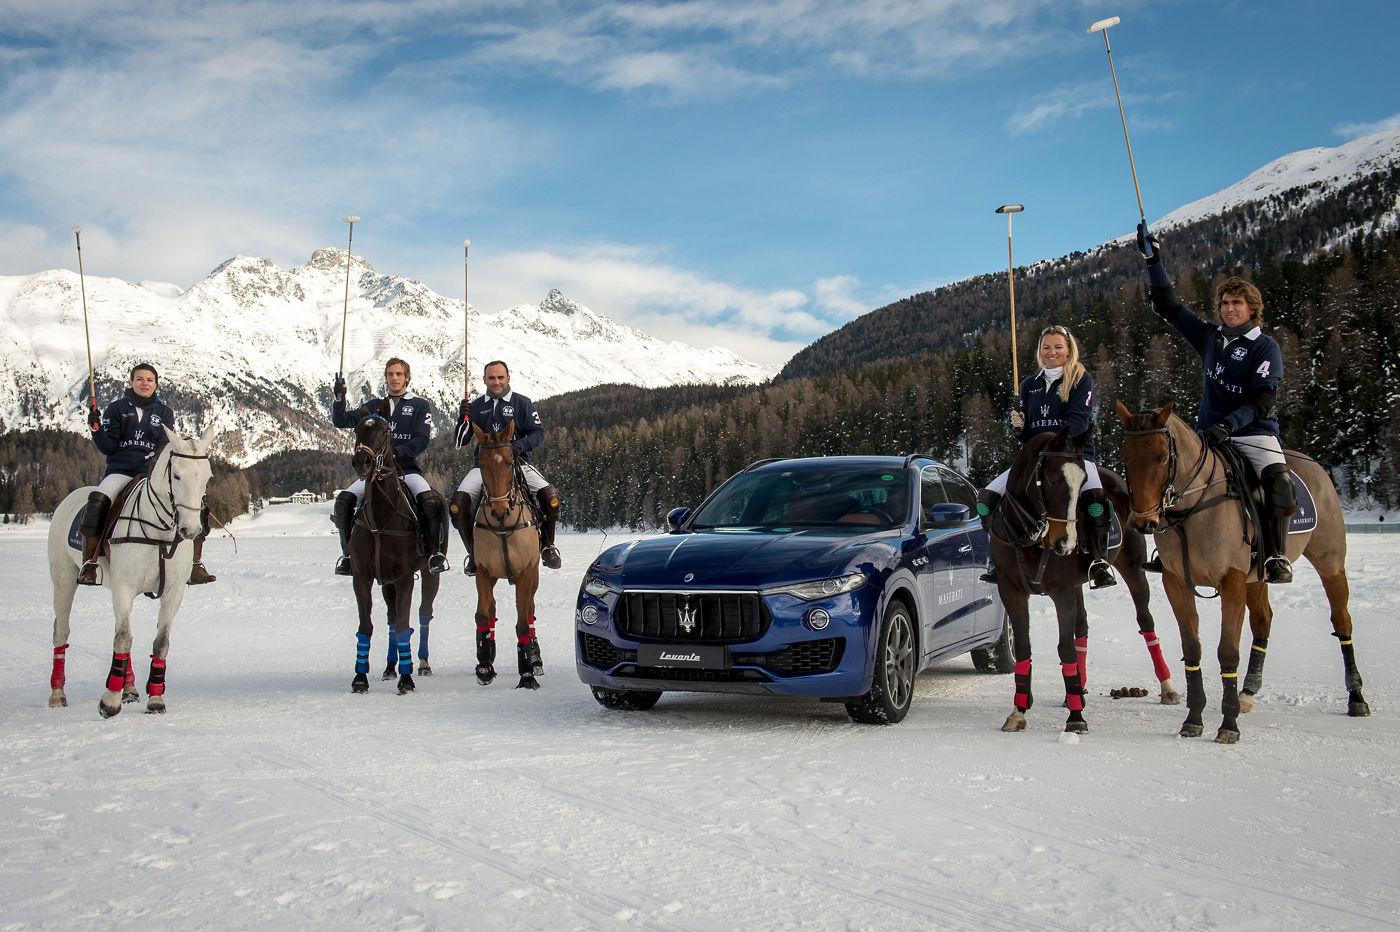 Polo players with raised clubs and Maserati Levante in the center